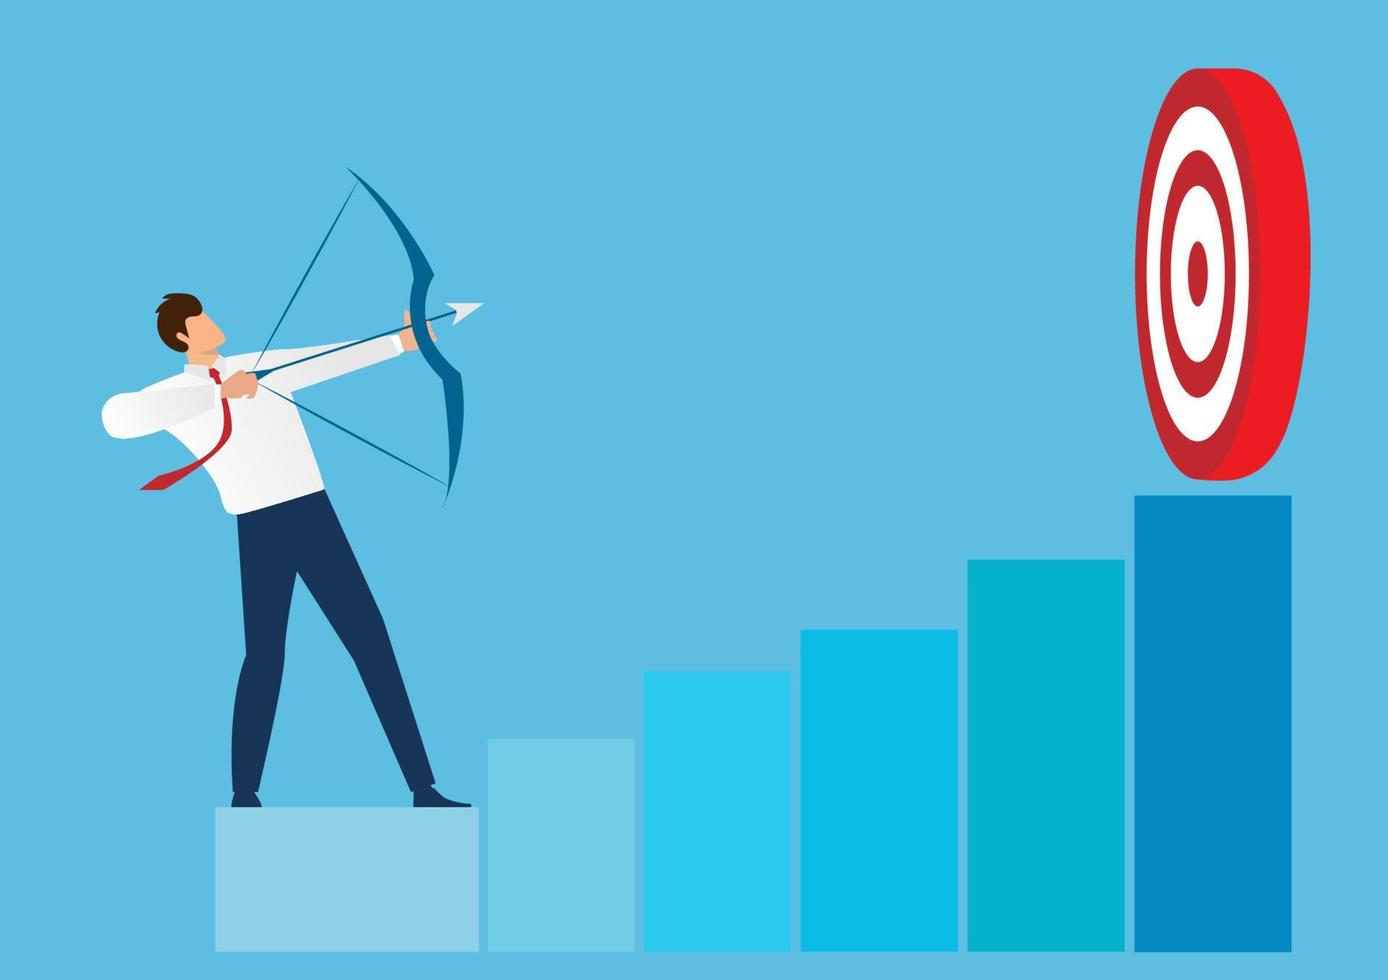 The businessman shoots arrows at the target on the bar graph. Ideas for achieving goals quickly. Flat style cartoon illustration vector